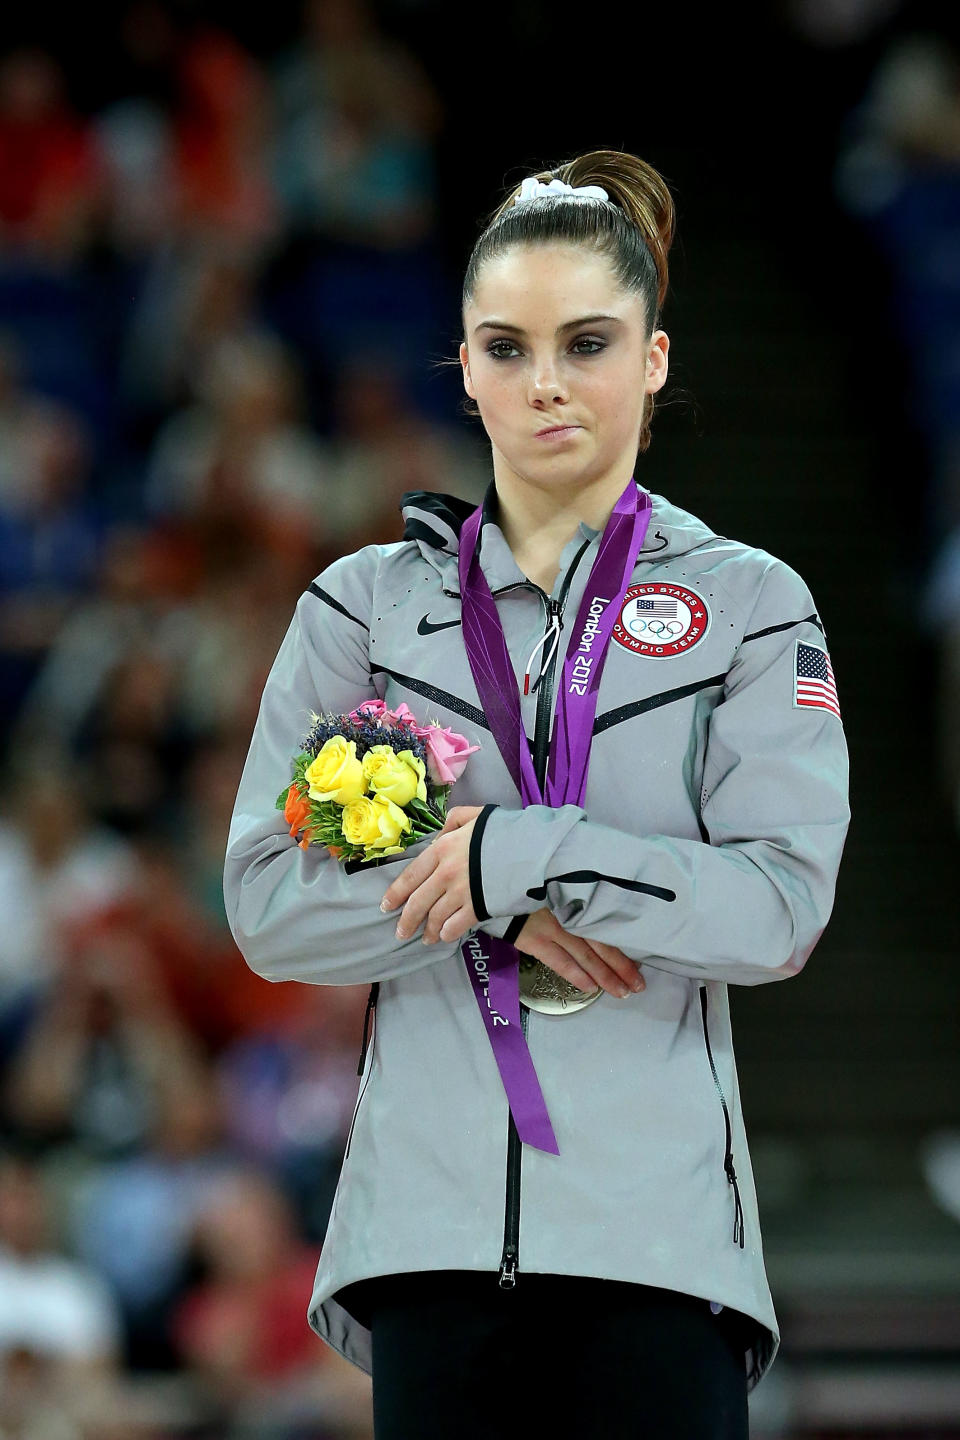 McKayla Maroney of the United States stands on the podium with her silver medal during the medal ceremony following the Artistic Gymnastics Women's Vault final on Day 9 of the London 2012 Olympic Games at North Greenwich Arena on August 5, 2012 in London, England. (Photo by Ronald Martinez/Getty Images)